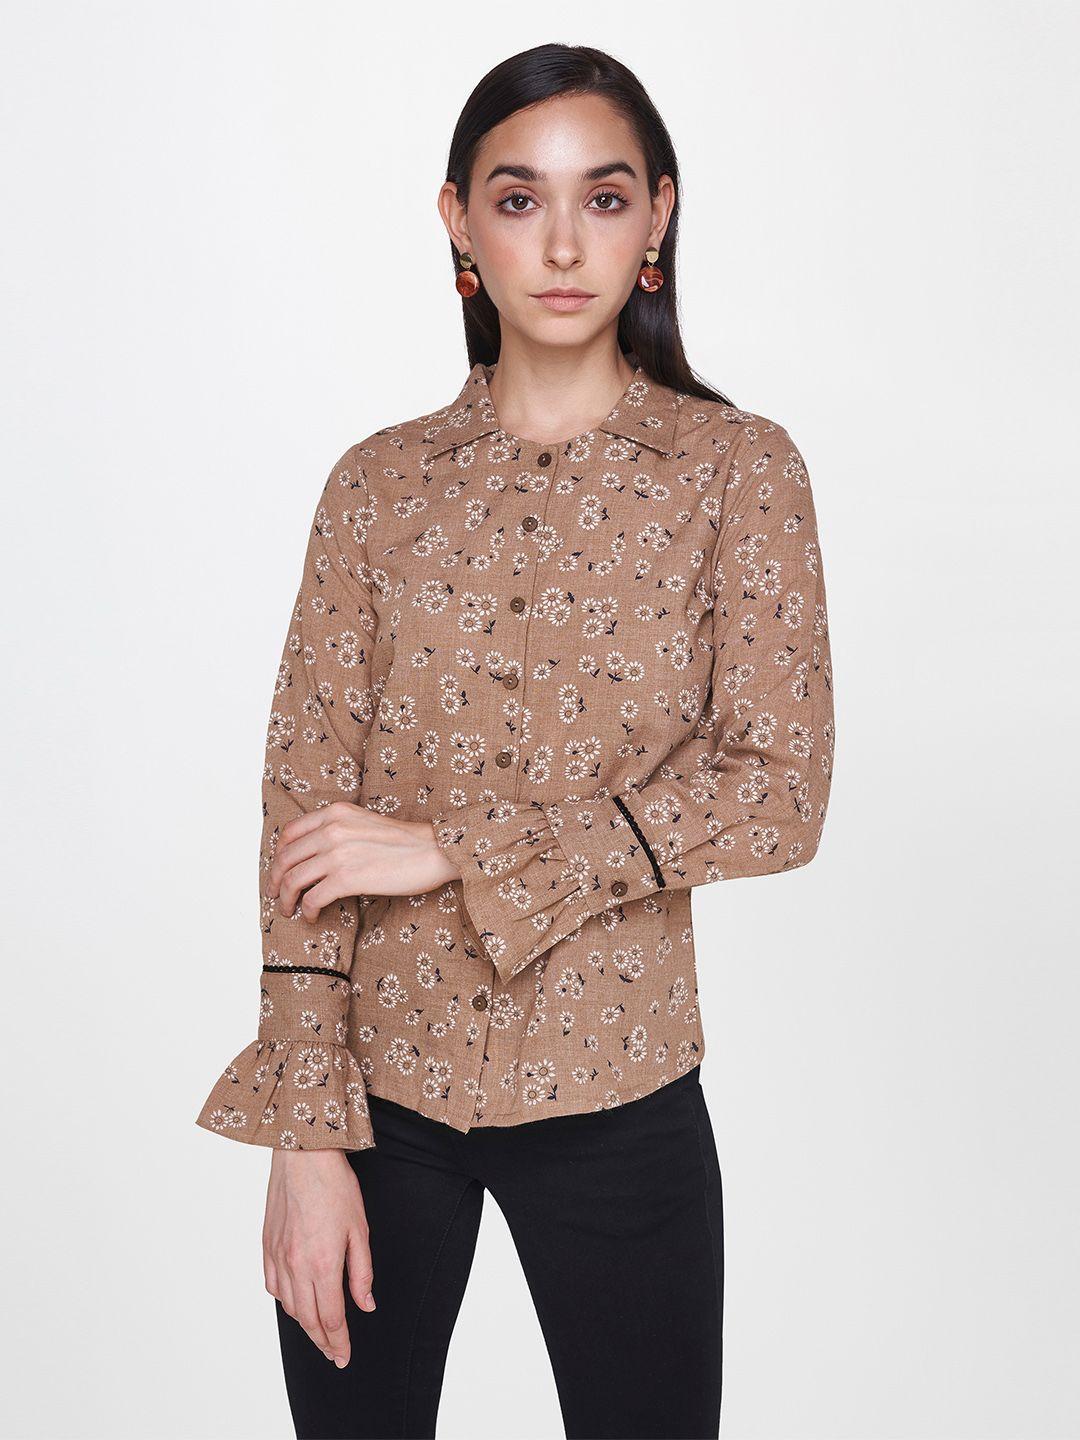 and women brown floral print shirt style top